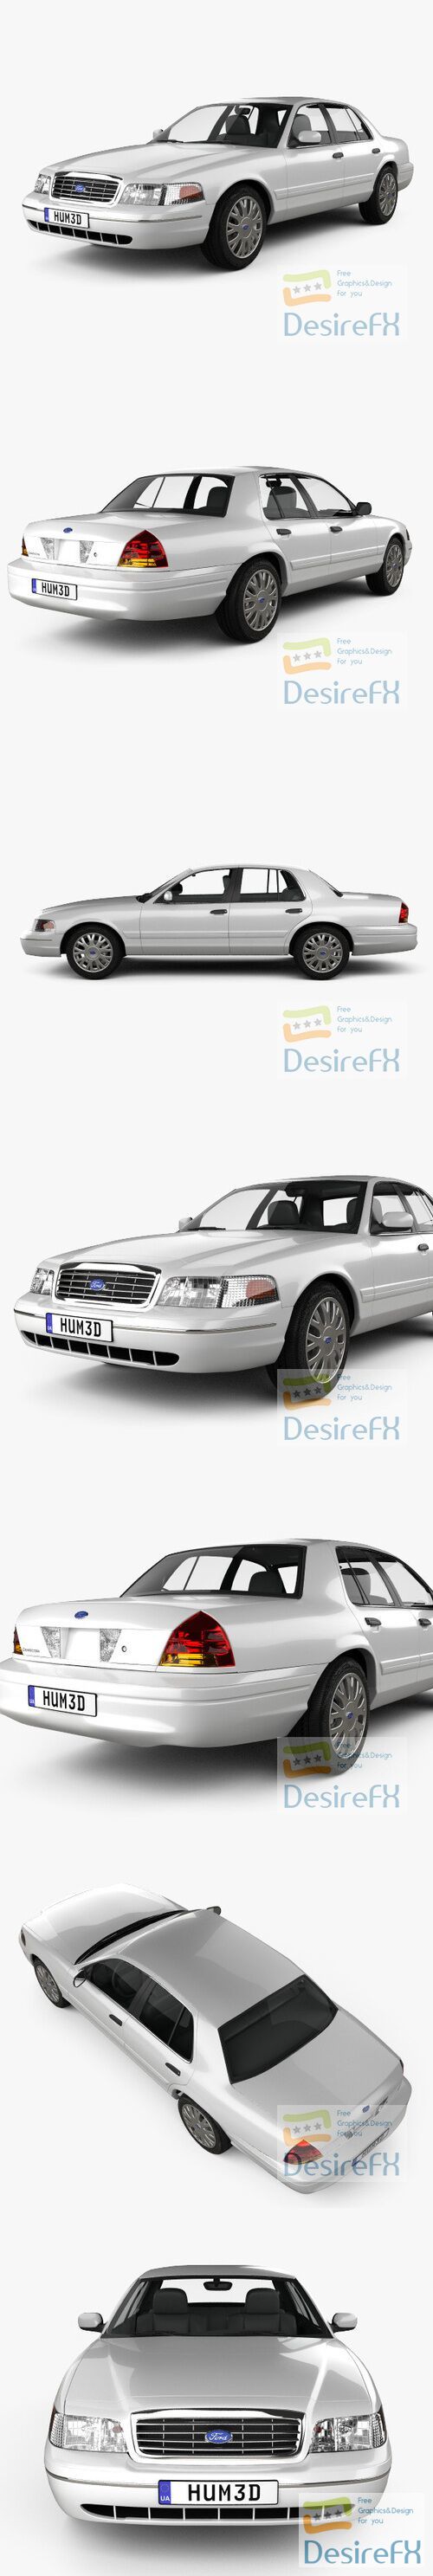 Ford Crown Victoria 2005 3D Model